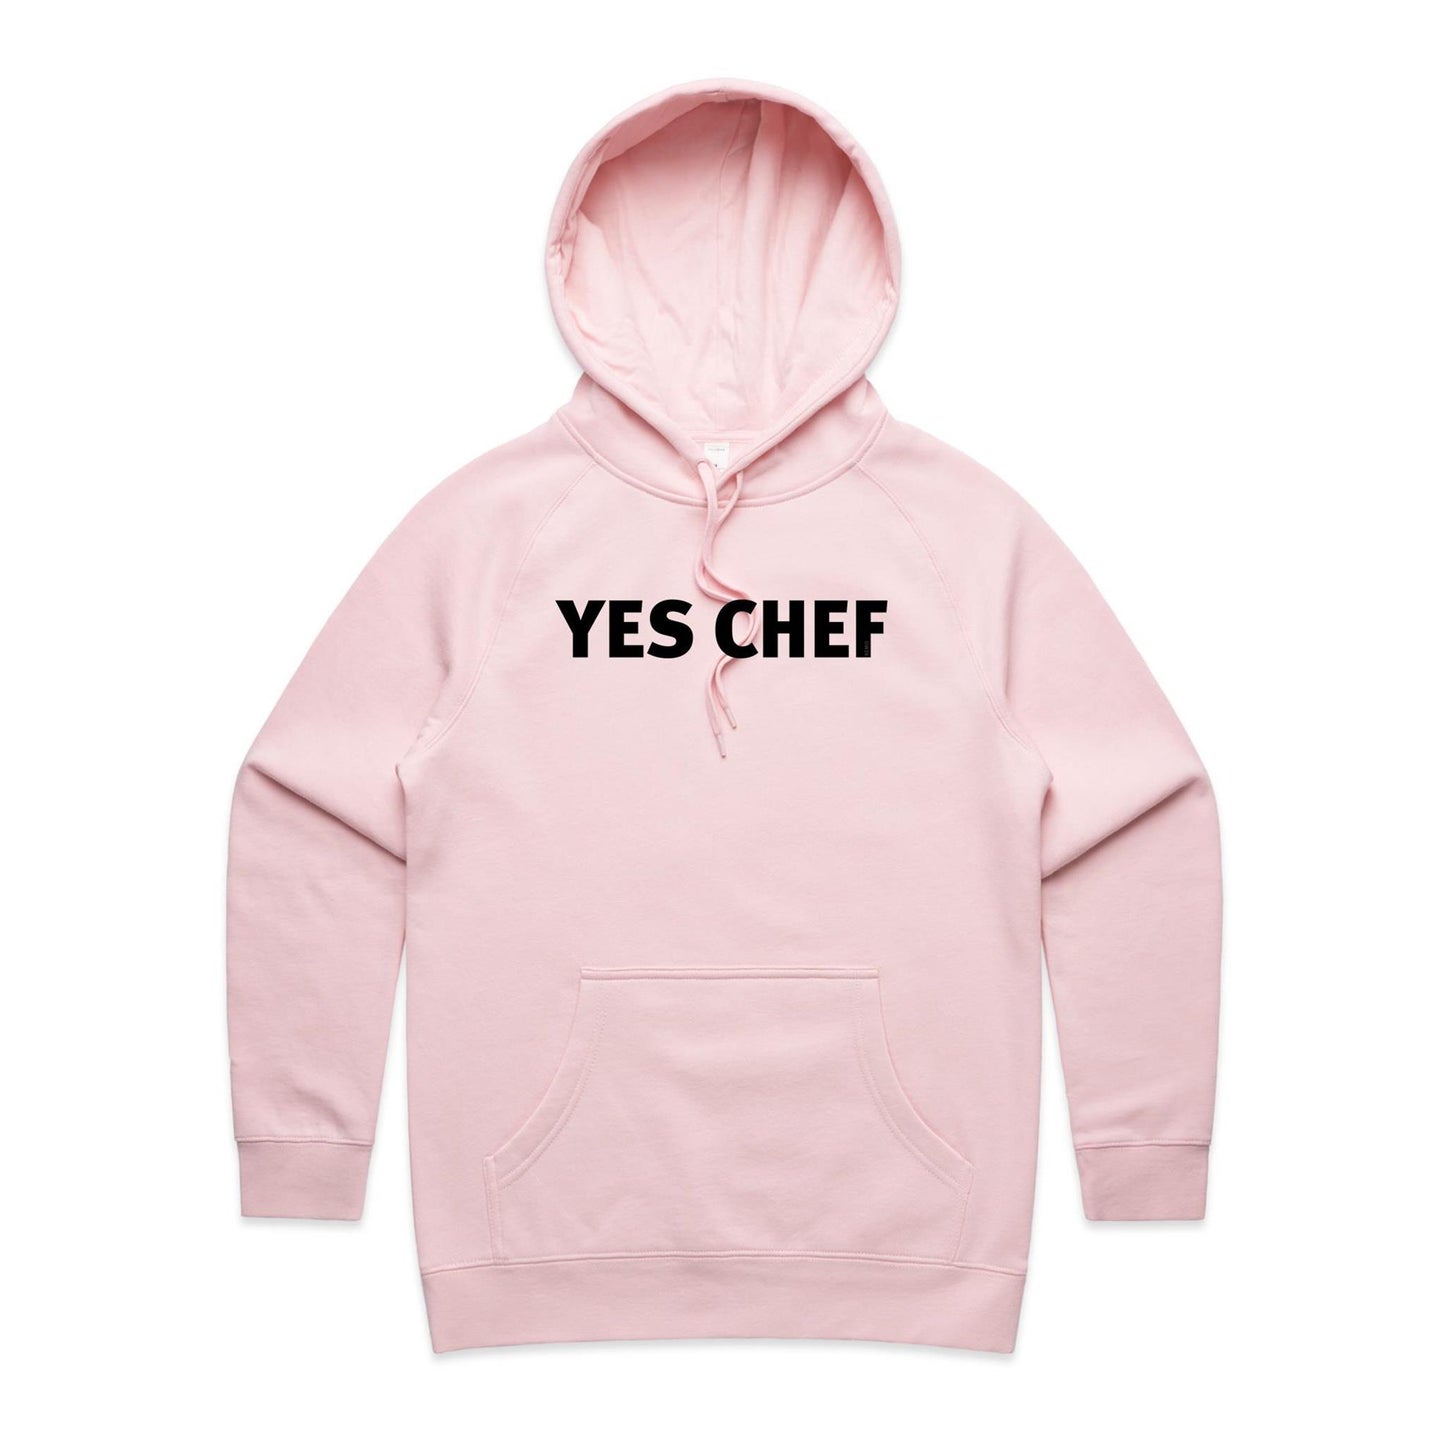 Yes Chef Hoodies for Women